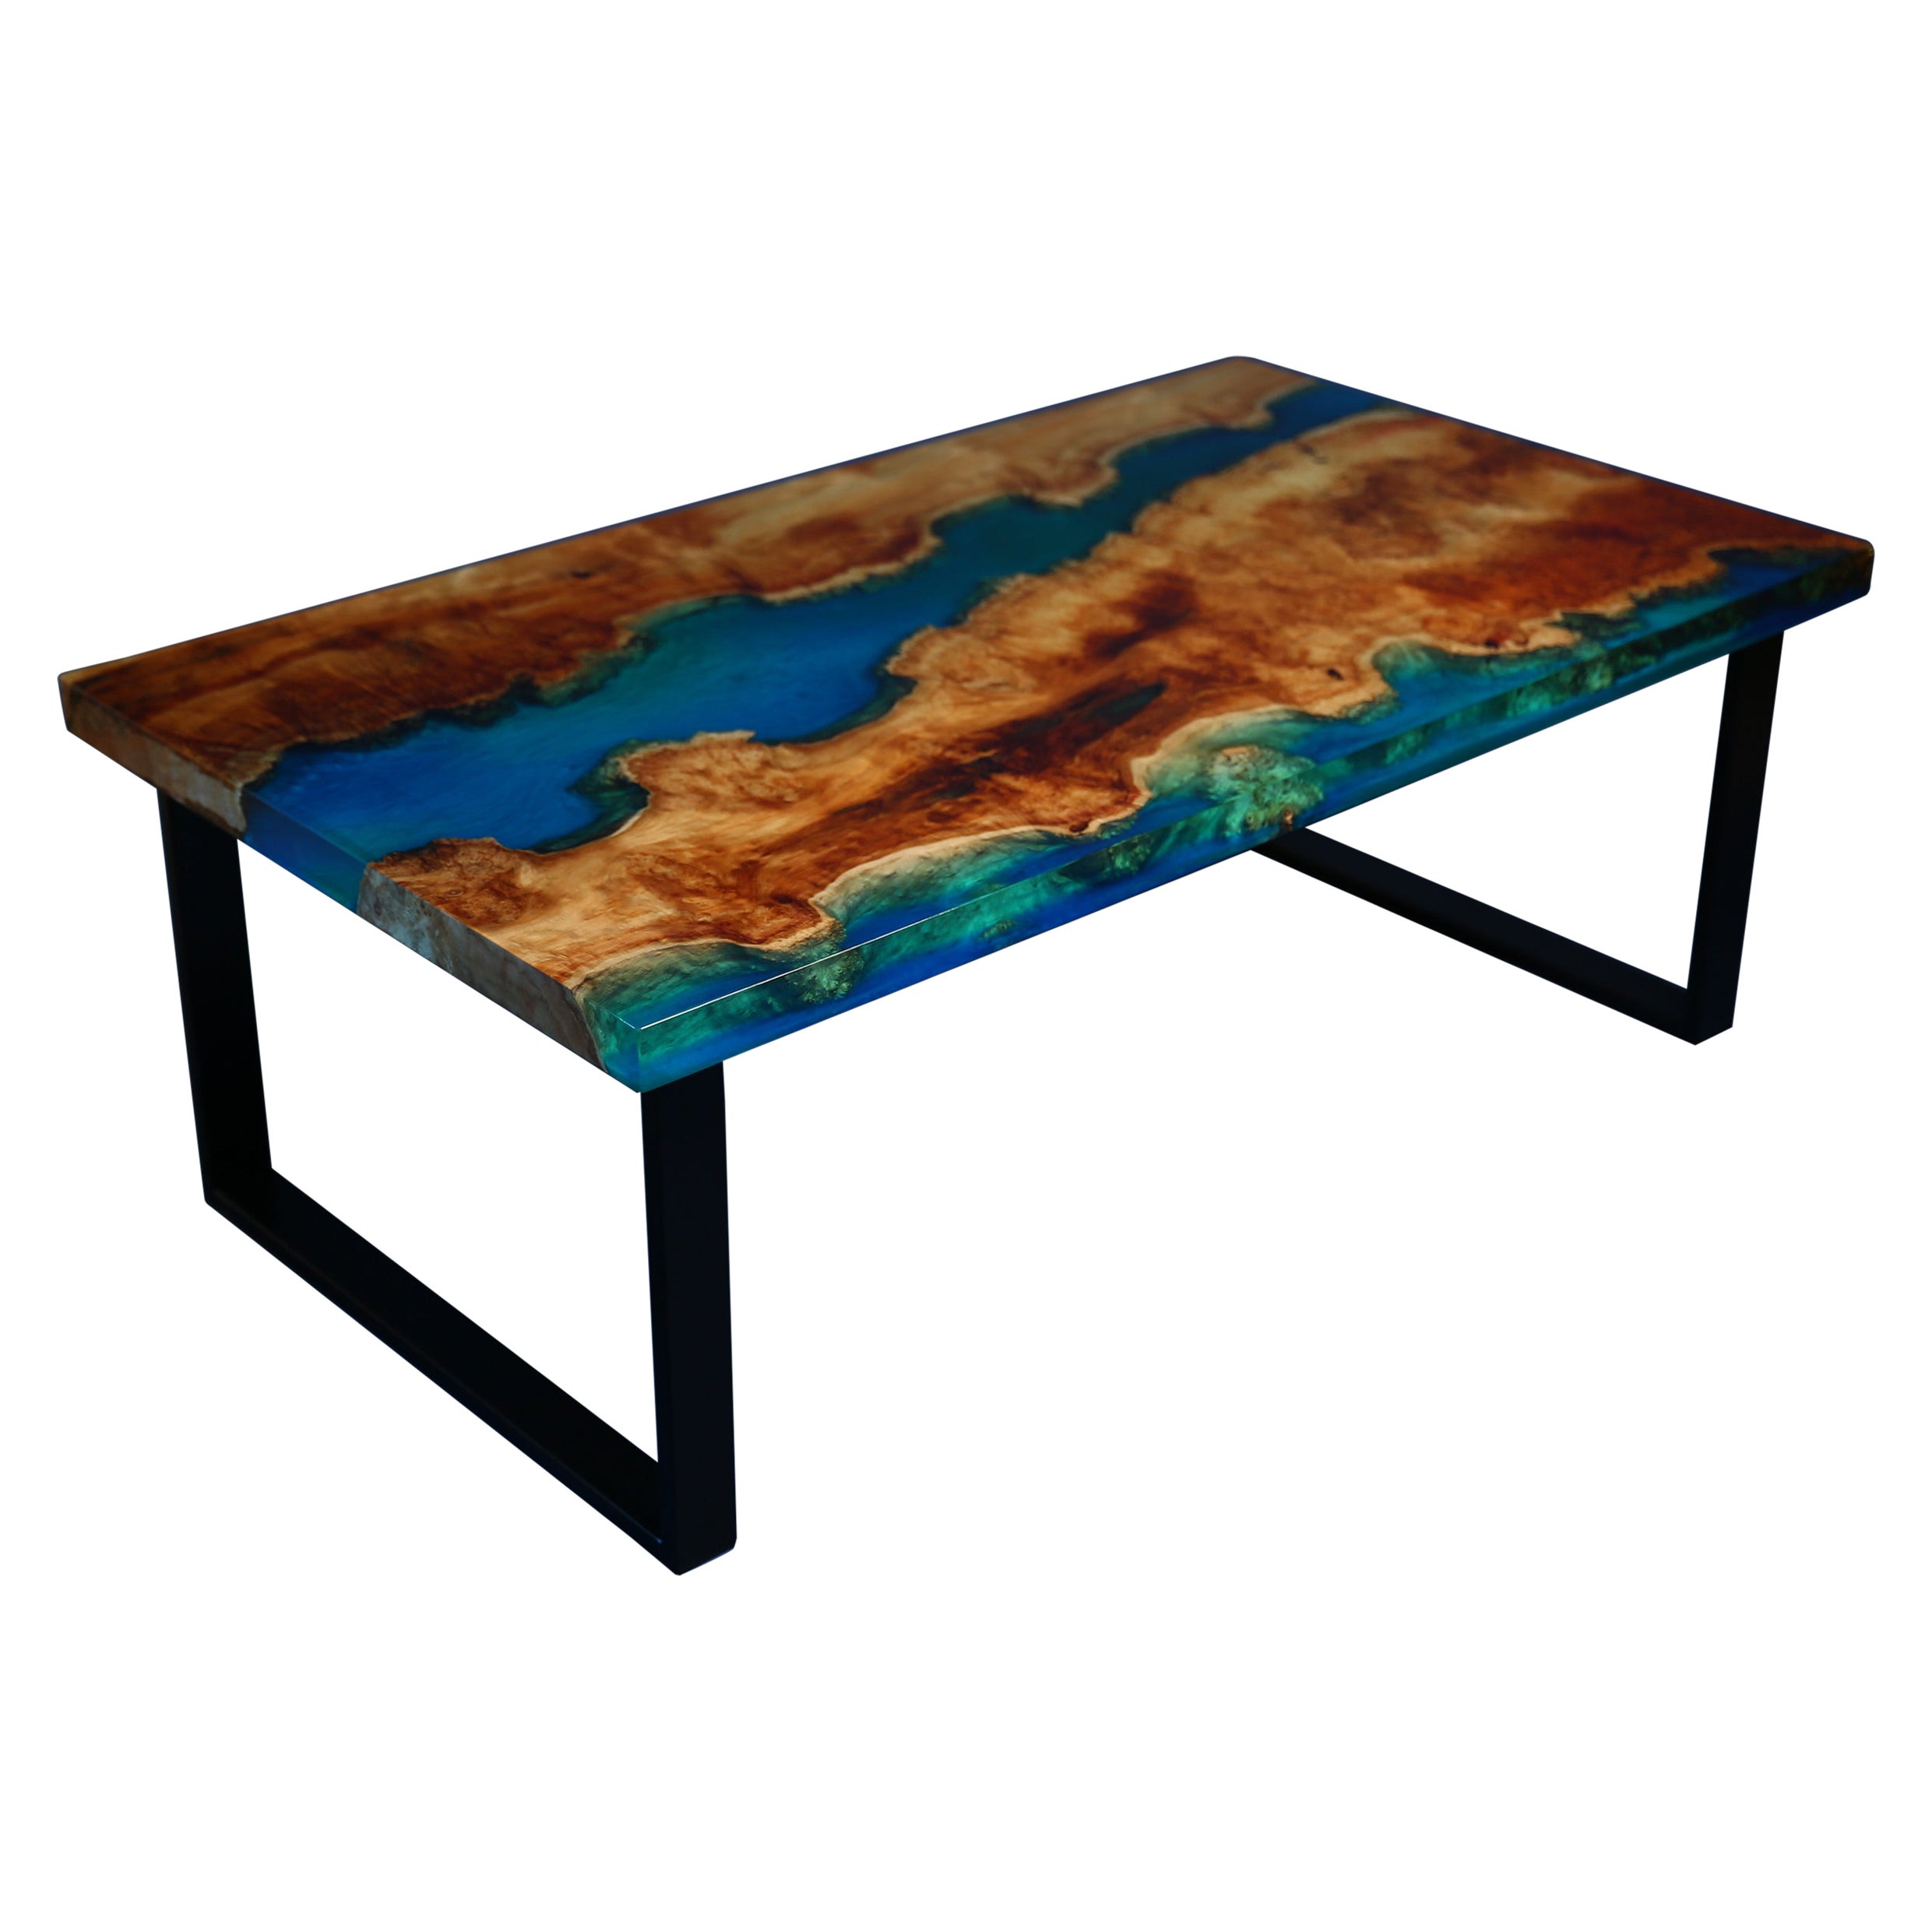 Ancient Maple Burl Live Egde Luxury Modern Design Coffee Table, Contemporary For Sale